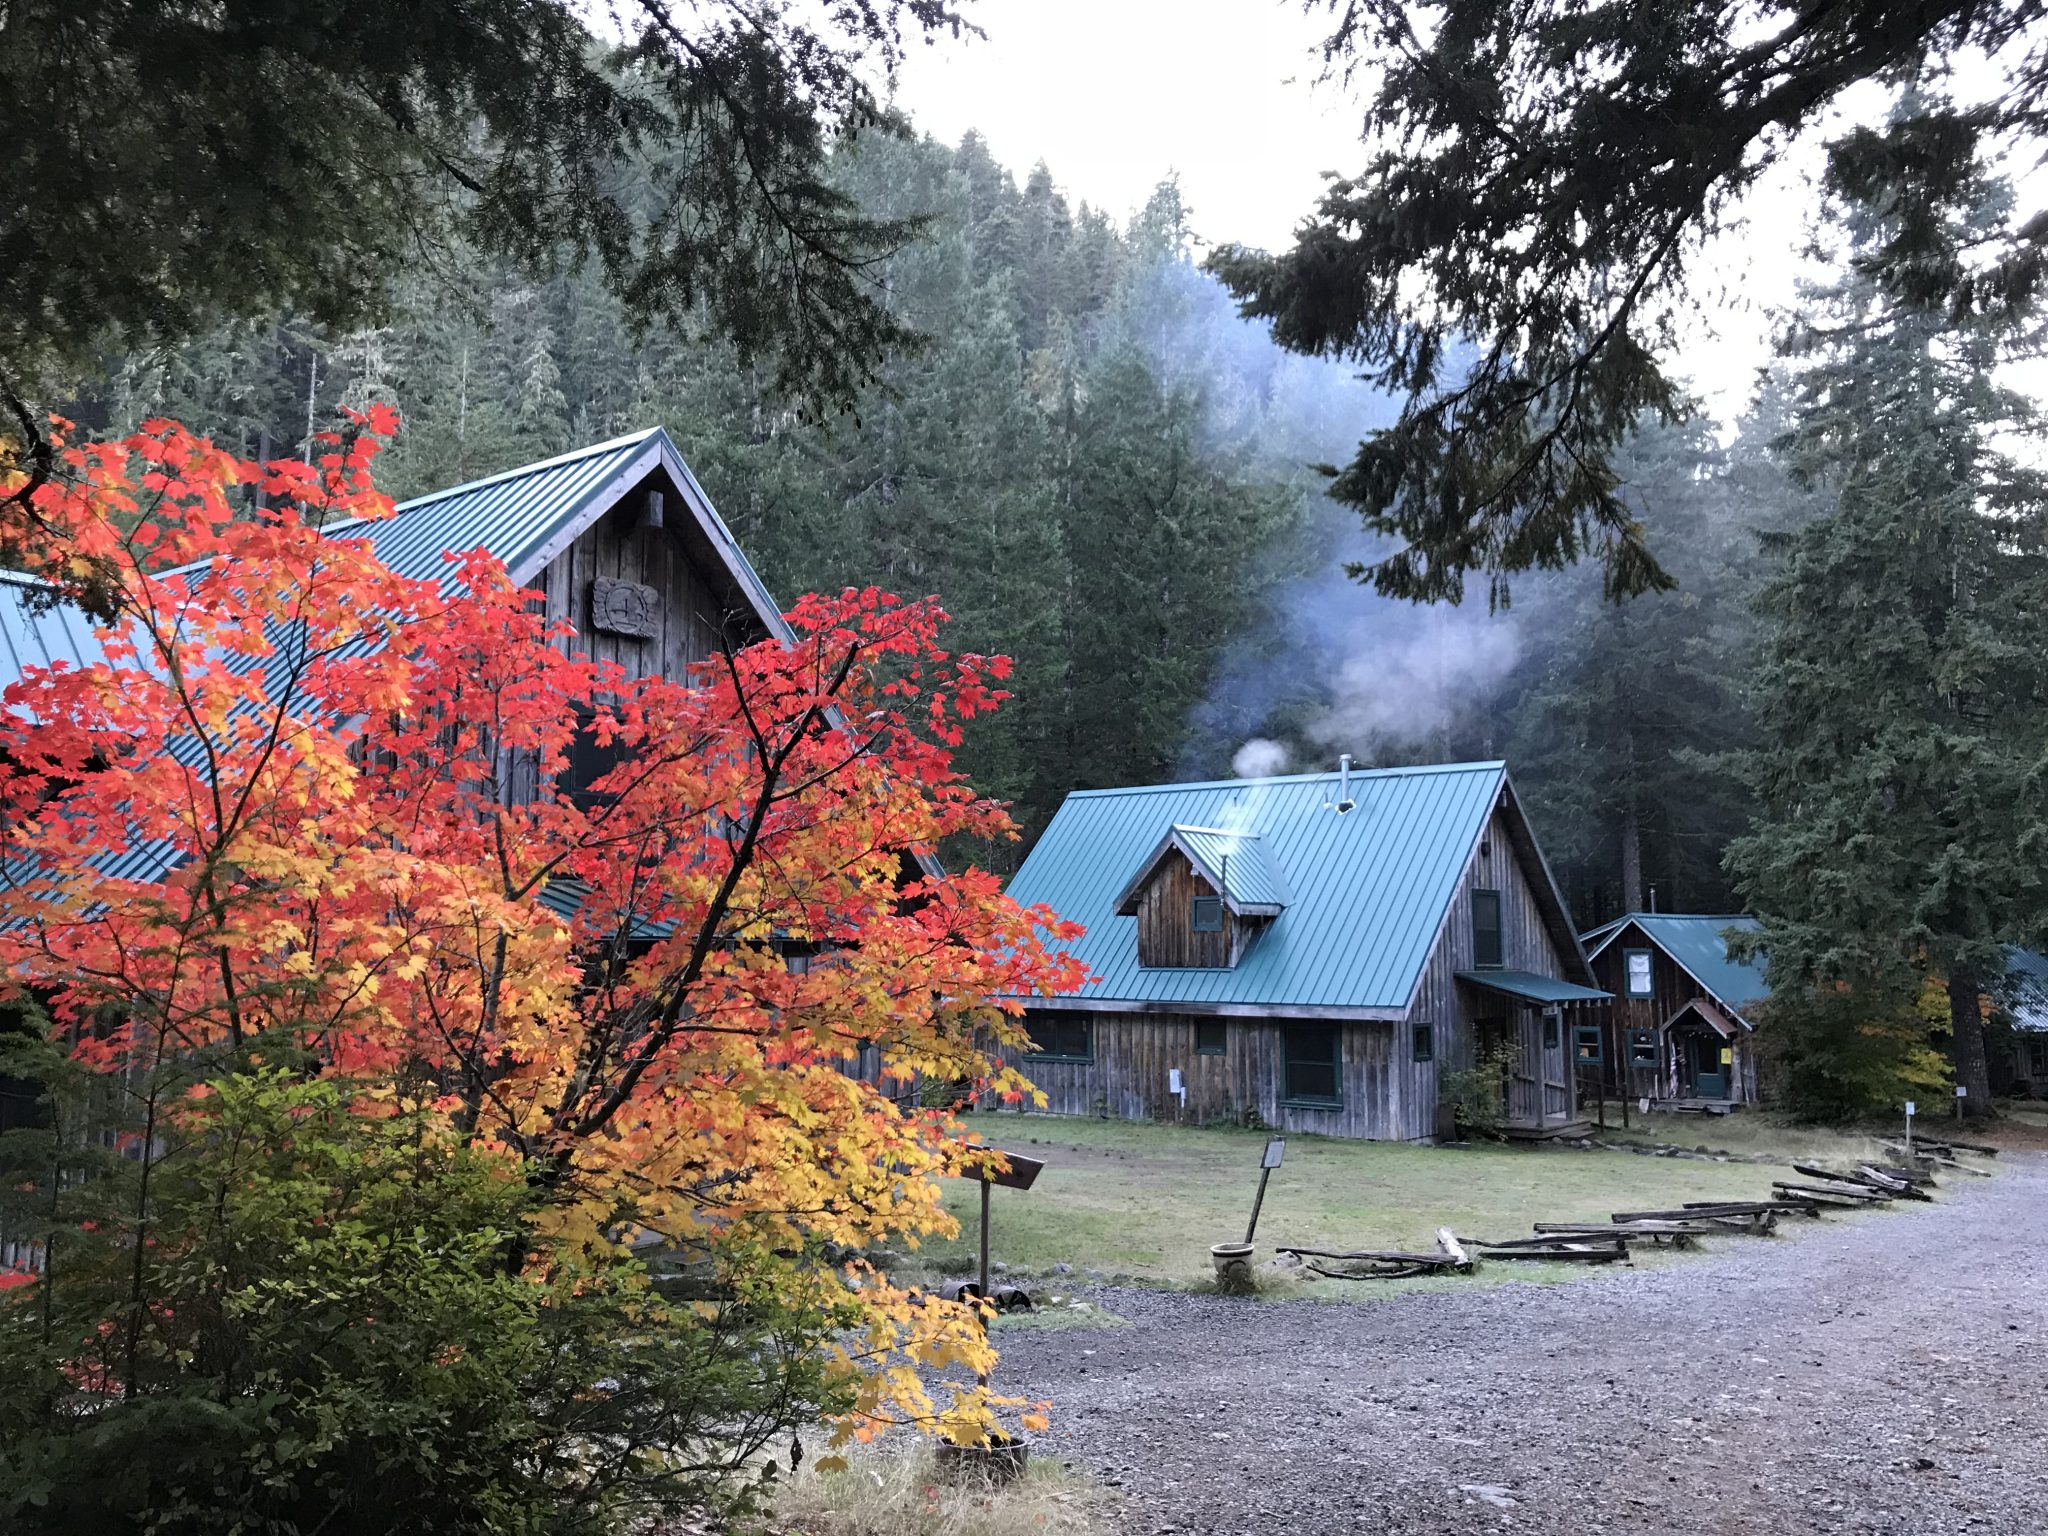 Oregon Life - Road Trips Oregon. The Ancient Forest Center at Opal Creek, Oregon, in the Opal Creek Wilderness. Historic cabins at Opal Creek can be reserved and rented. Changing fall leaves in the foreground contrast with the green tin roofs of the cabins, with smoke swirling above them at dusk in the mountains.